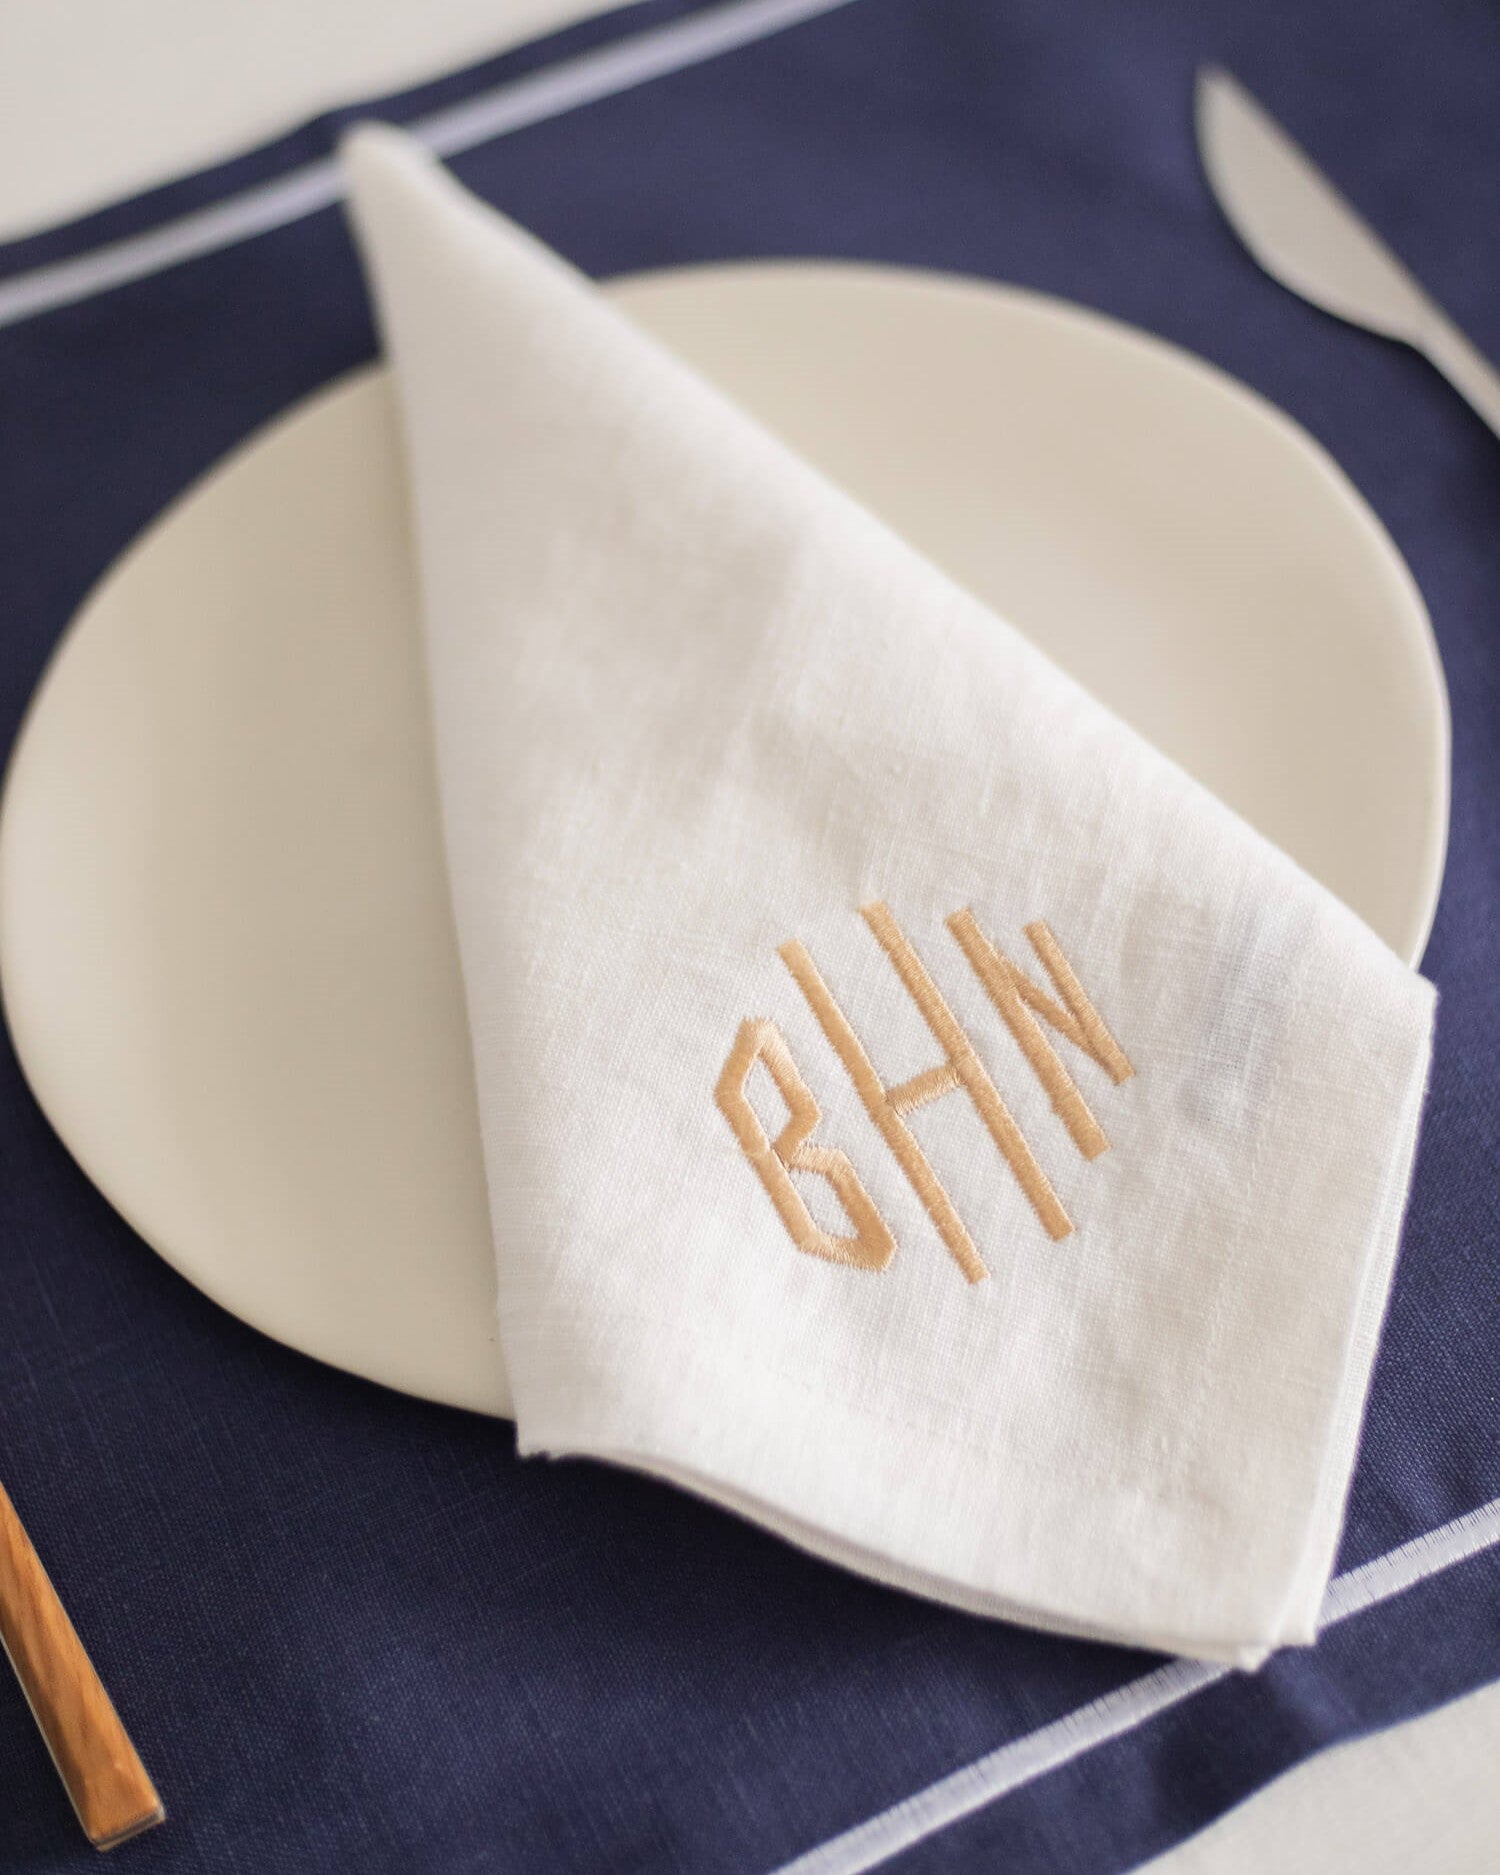 ava and ava ph personalized linens monogram custom embroidery on table napkins